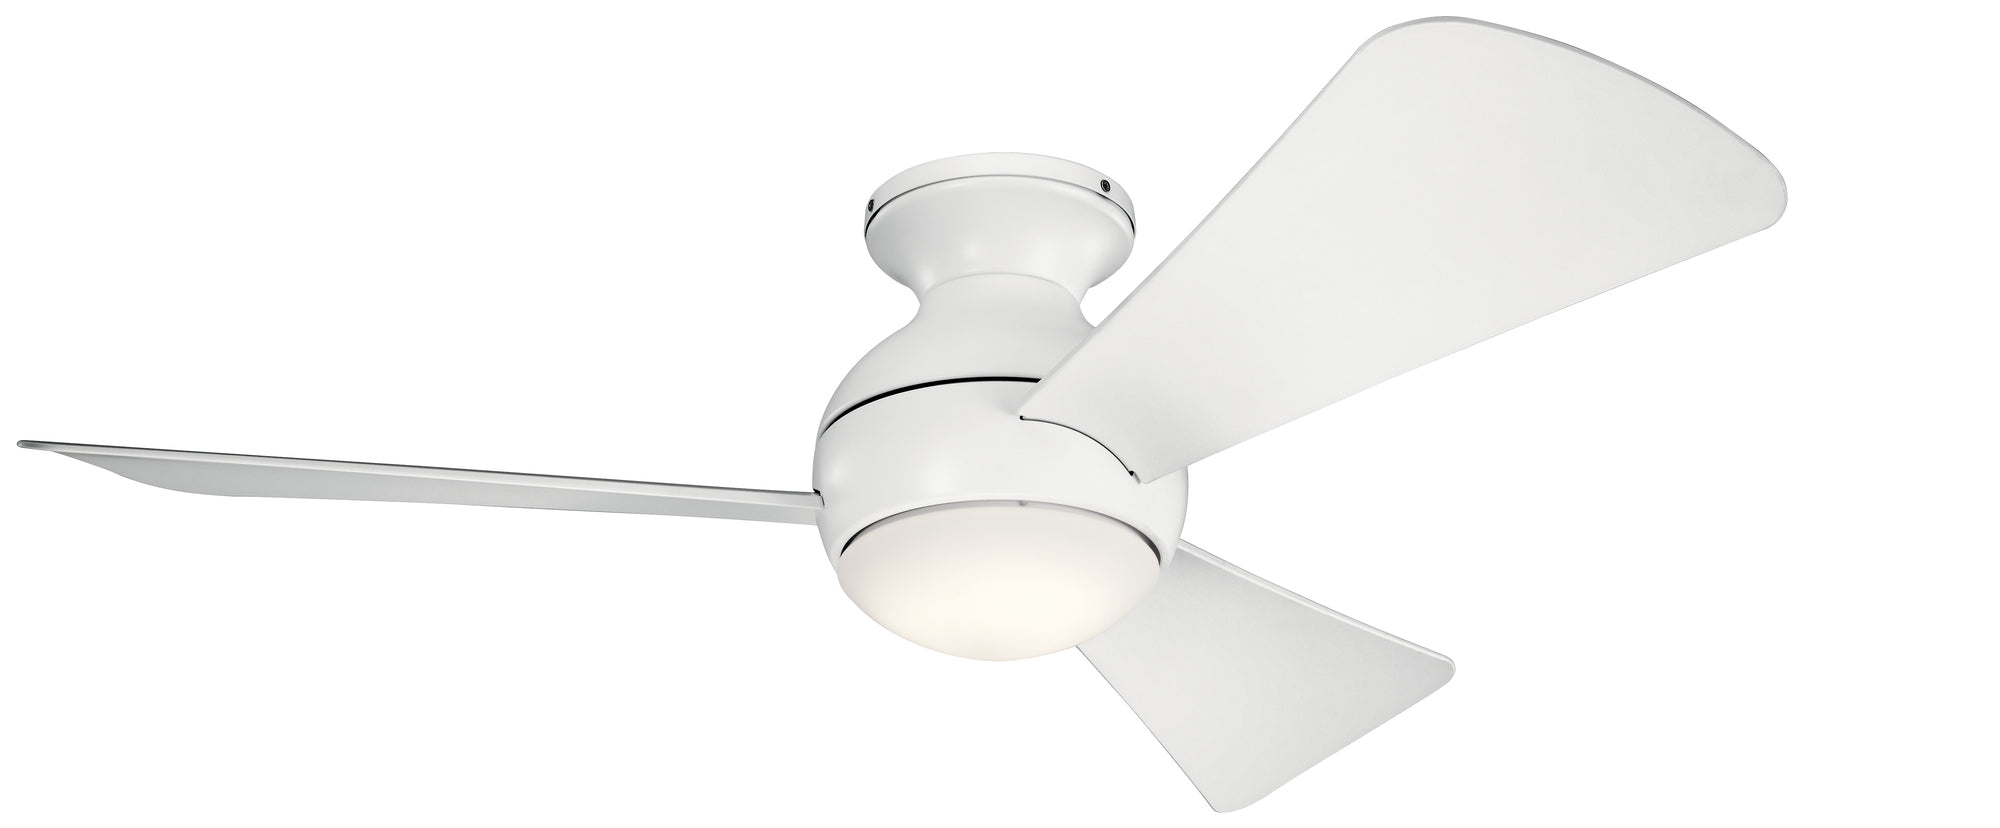 SOLA Ceiling fan White INTEGRATED LED - 330151MWH | KICHLER